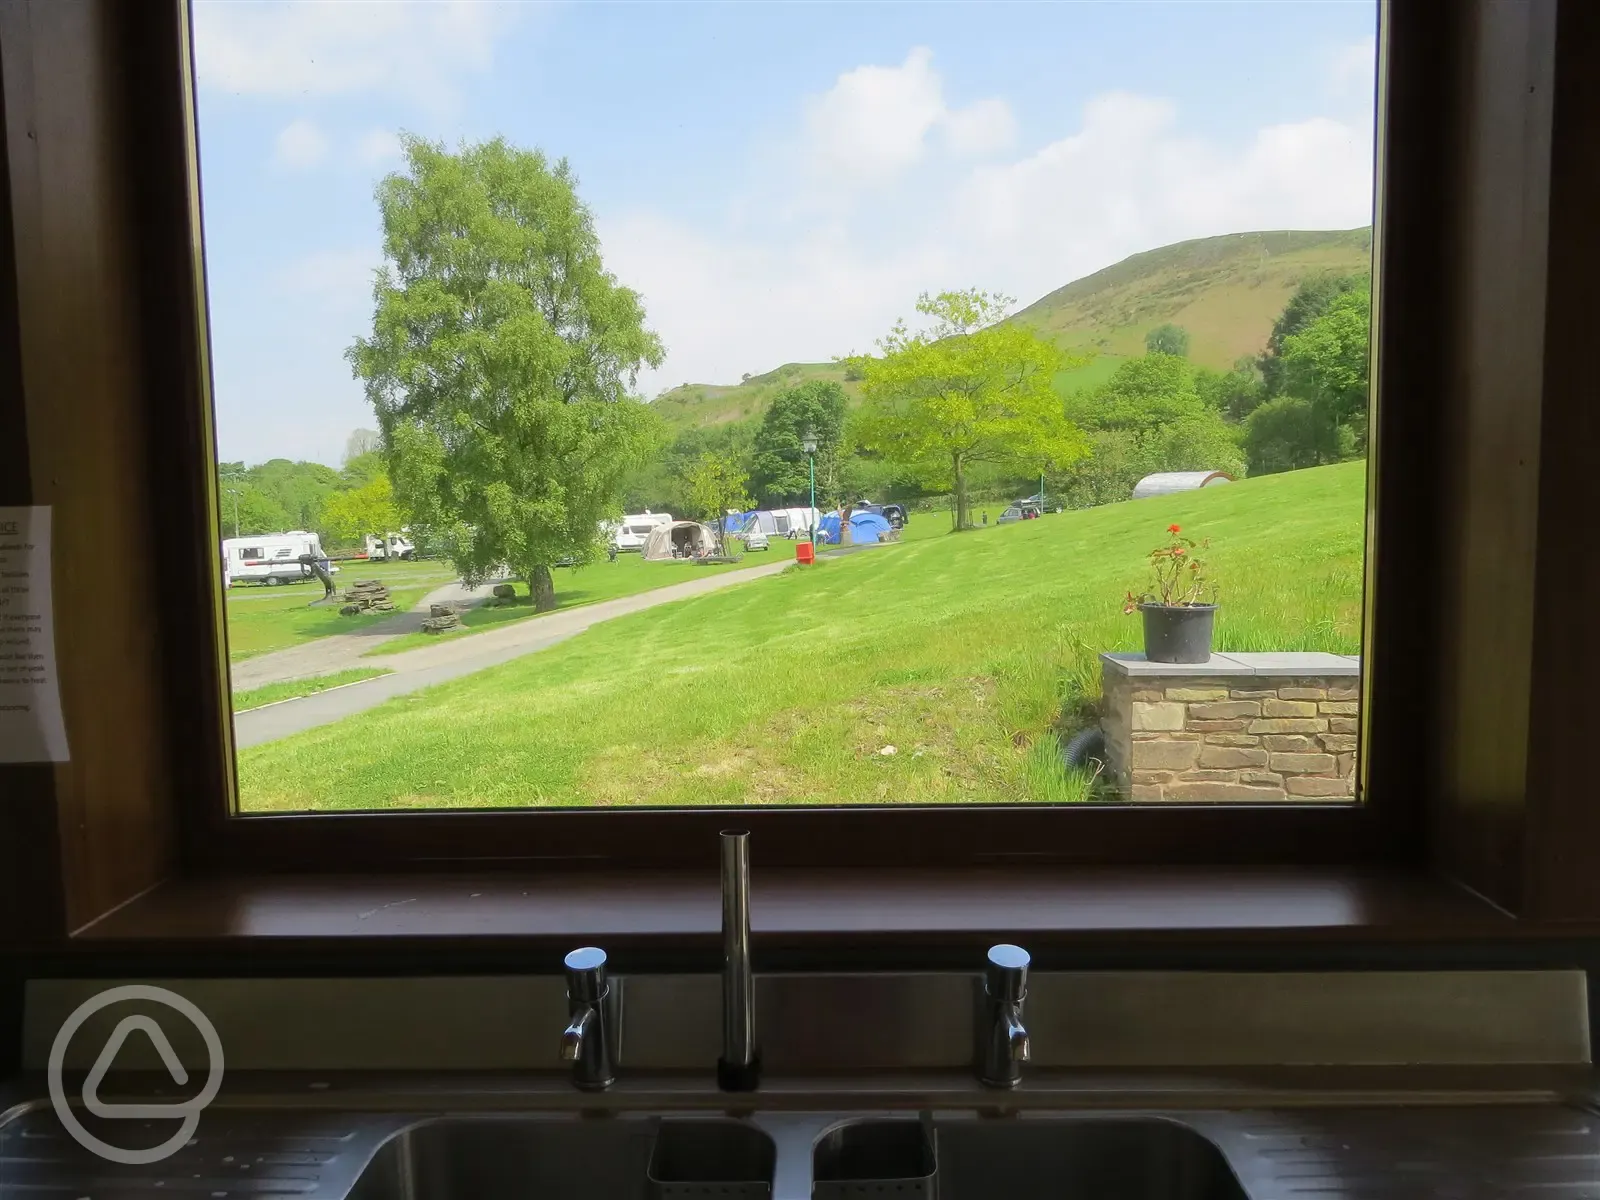 View from the washing up sinks